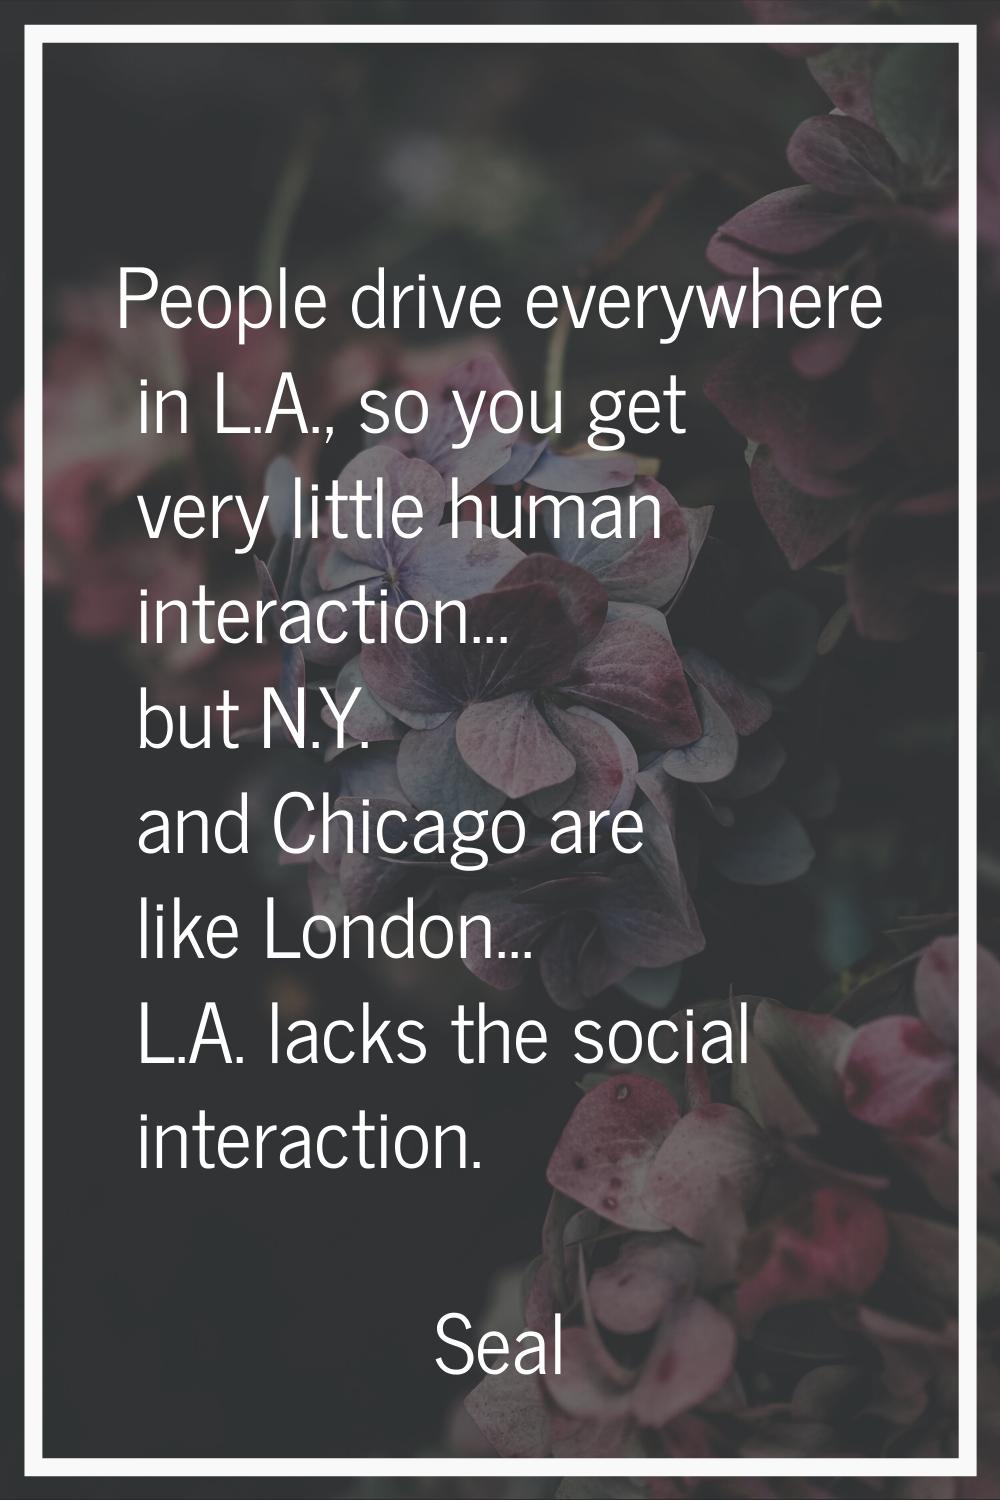 People drive everywhere in L.A., so you get very little human interaction... but N.Y. and Chicago a